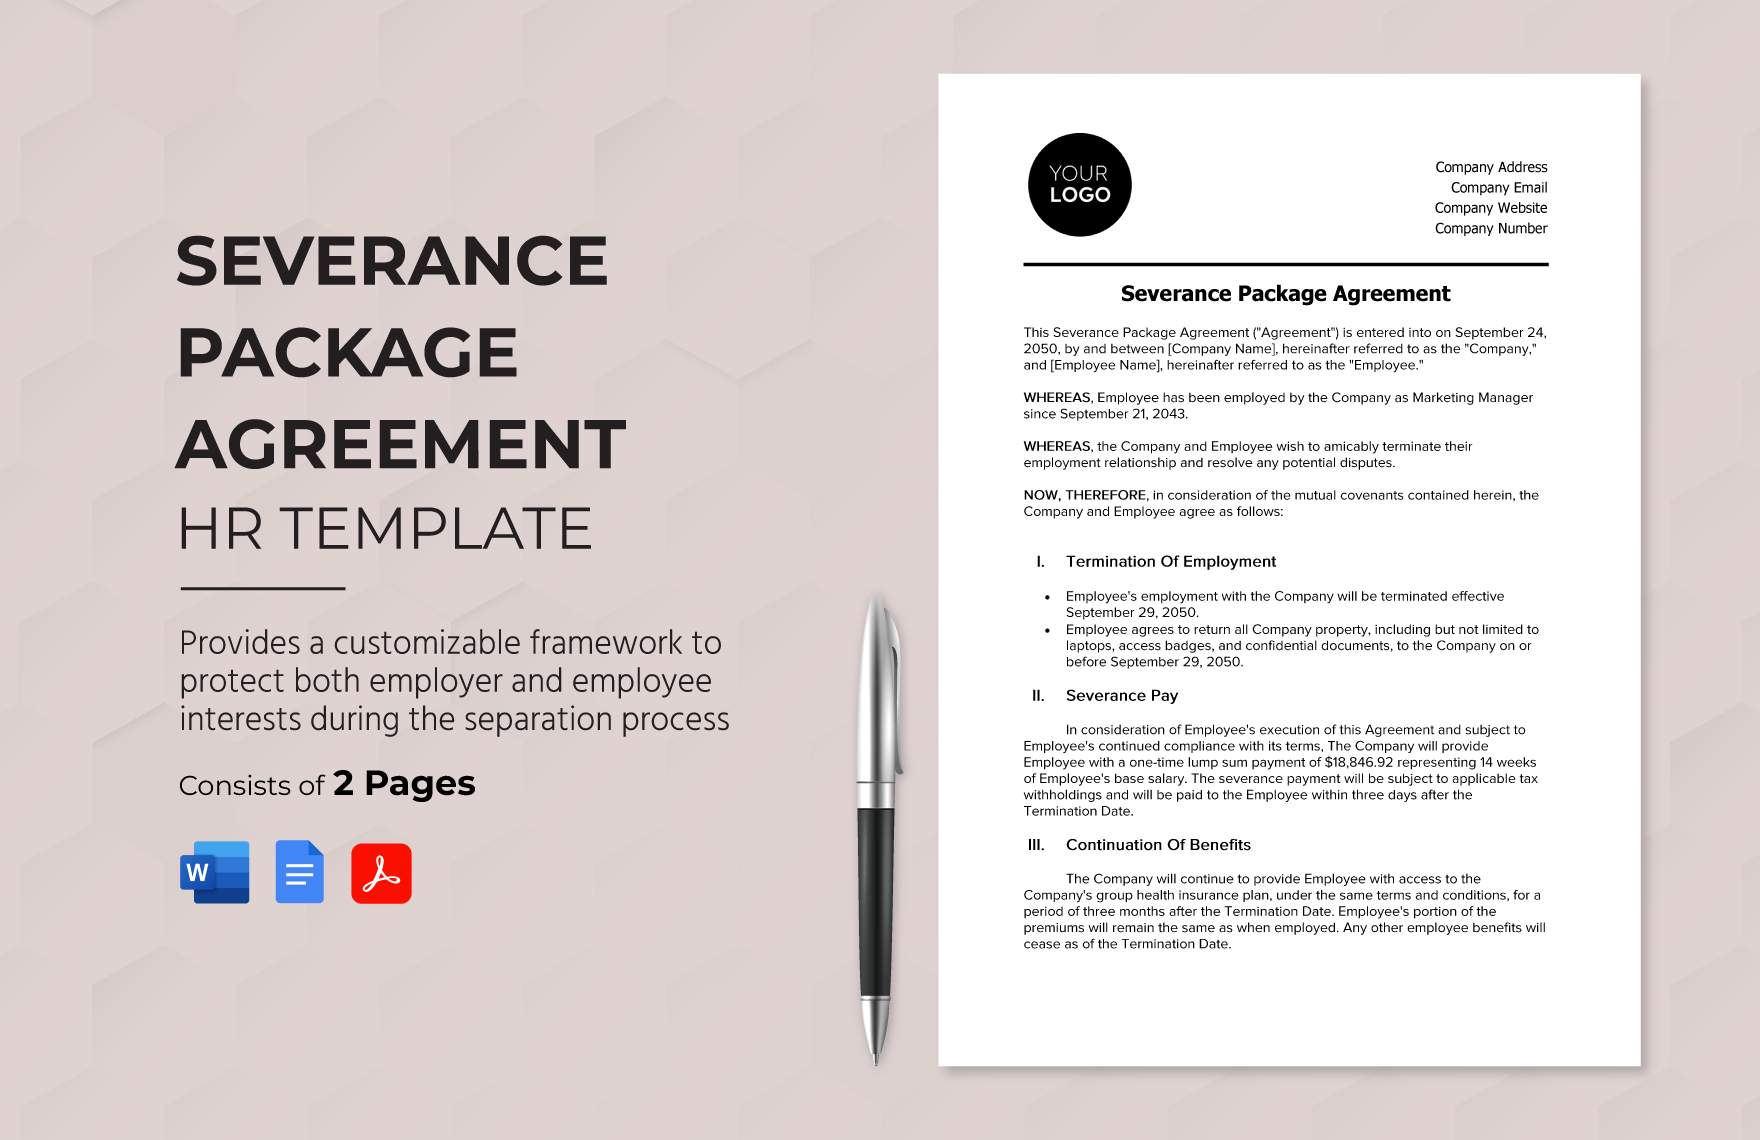 Severance Package Agreement HR Template